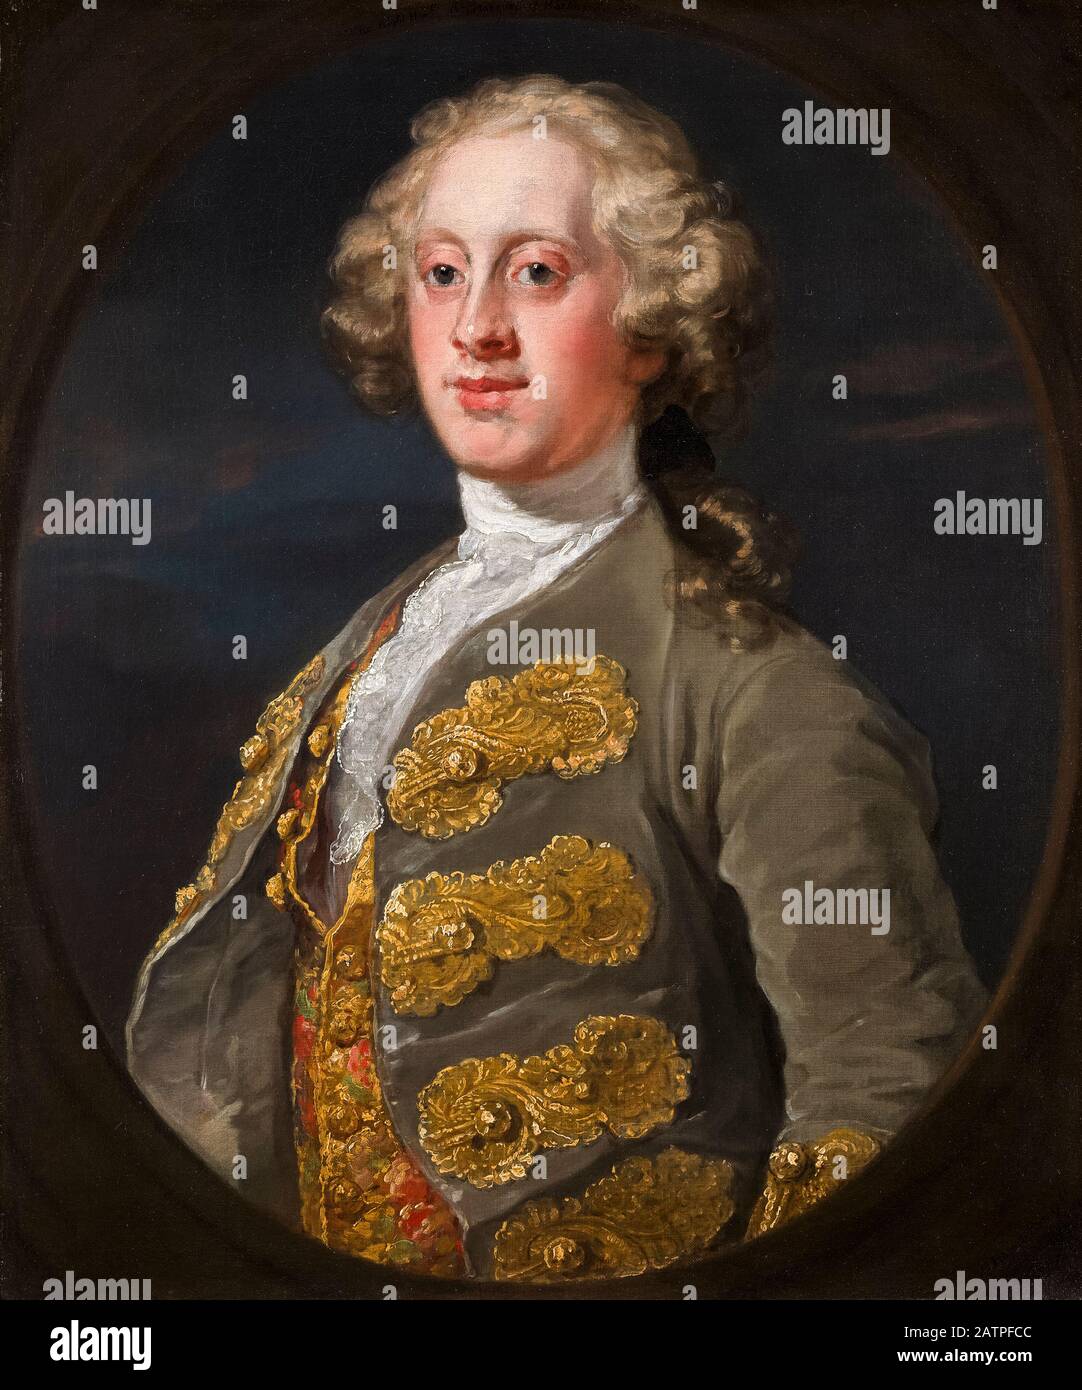 William Cavendish, Marquess of Hartington, Later 4th Duke of Devonshire (1720-1764), portrait painting by William Hogarth, 1741 Stock Photo